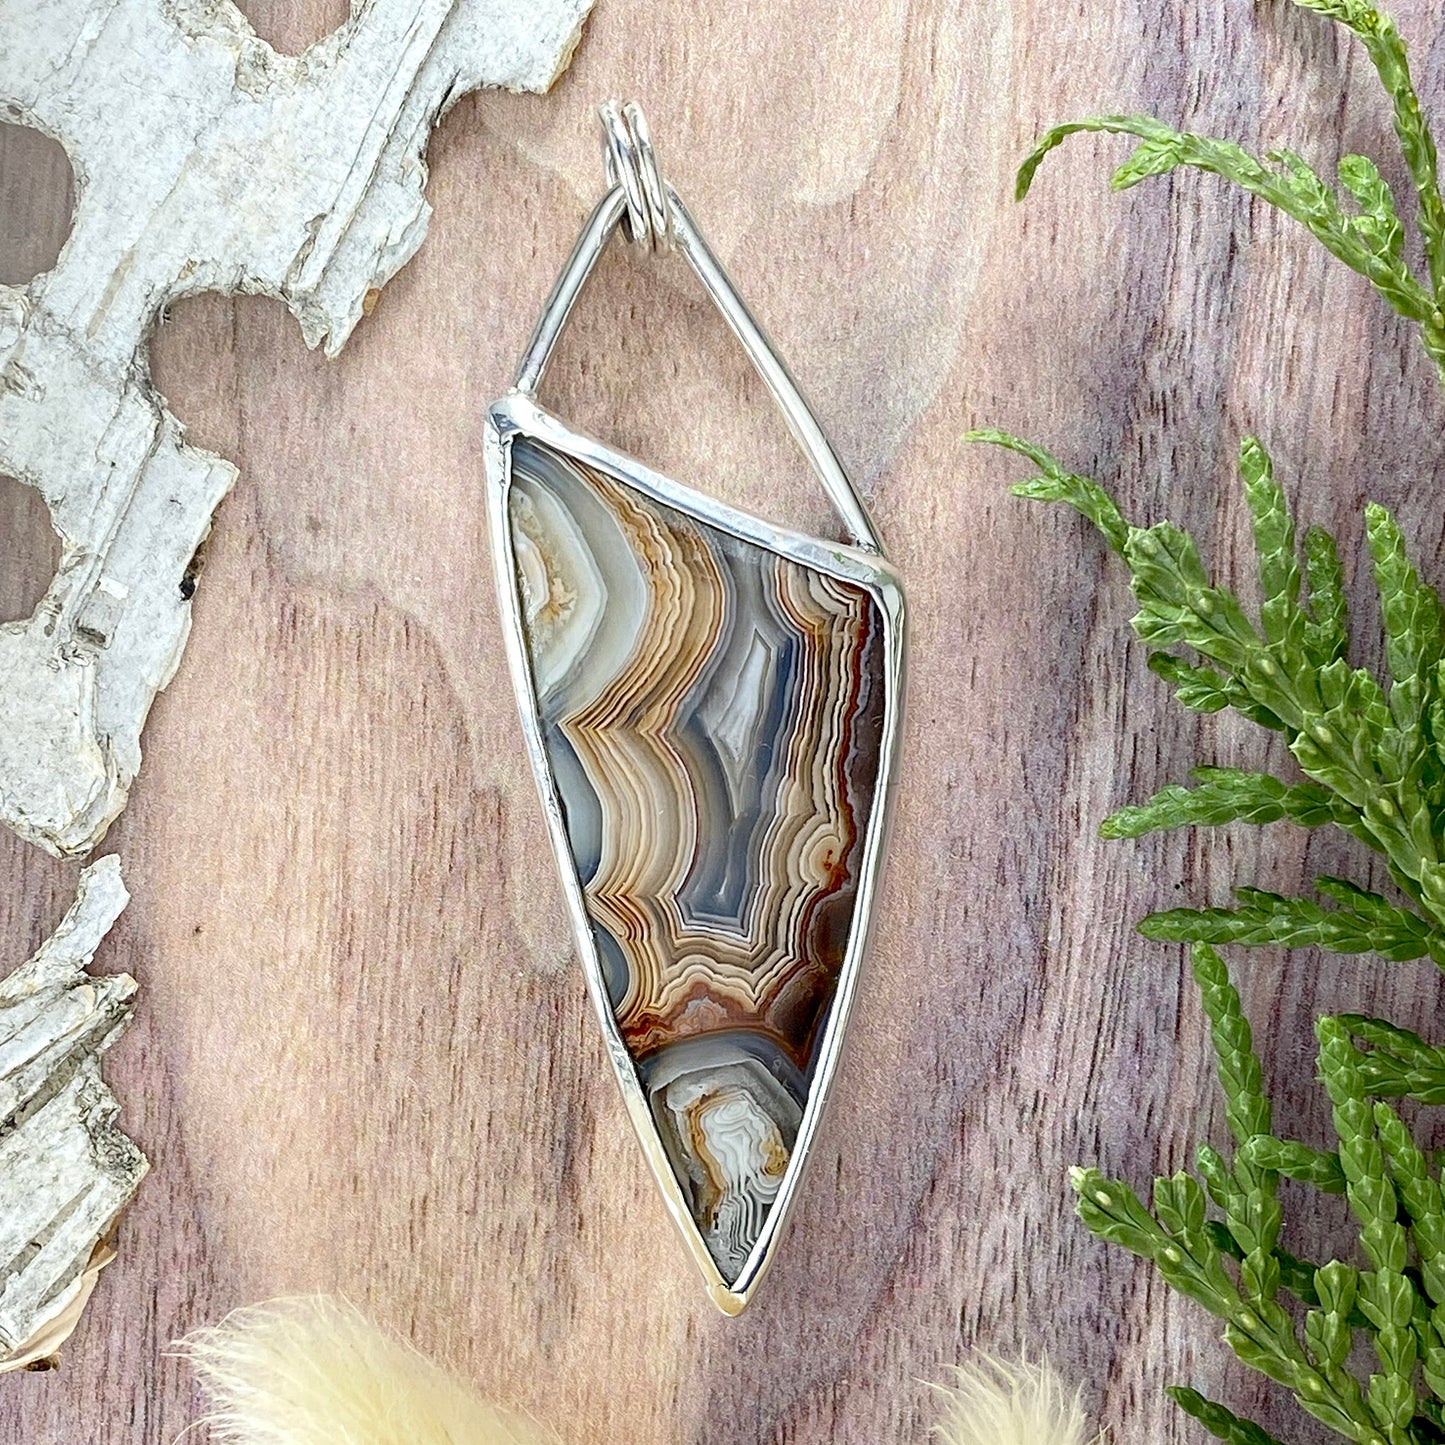 Laguna Lace Agate Pendant Front View - Stone Treasures by the Lake